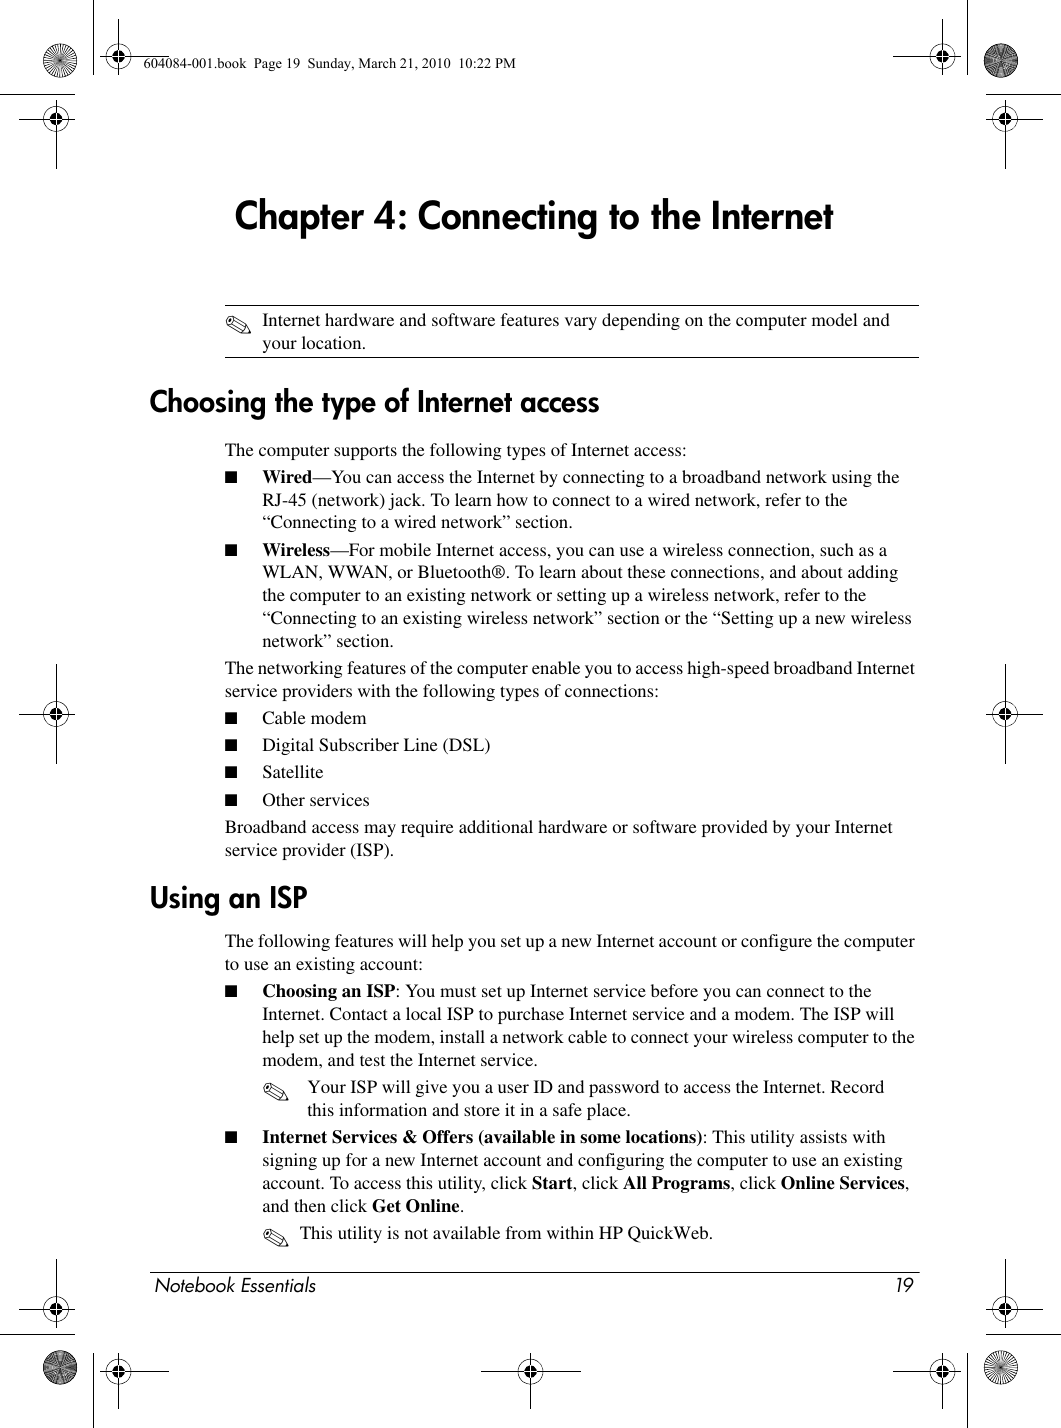 Notebook Essentials 19Chapter 4: Connecting to the Internet✎Internet hardware and software features vary depending on the computer model and your location.The computer supports the following types of Internet access:■Wired—You can access the Internet by connecting to a broadband network using the RJ-45 (network) jack. To learn how to connect to a wired network, refer to the “Connecting to a wired network” section.■Wireless—For mobile Internet access, you can use a wireless connection, such as a WLAN, WWAN, or Bluetooth®. To learn about these connections, and about adding the computer to an existing network or setting up a wireless network, refer to the “Connecting to an existing wireless network” section or the “Setting up a new wireless network” section.The networking features of the computer enable you to access high-speed broadband Internet service providers with the following types of connections:■Cable modem■Digital Subscriber Line (DSL)■Satellite■Other servicesBroadband access may require additional hardware or software provided by your Internet service provider (ISP).The following features will help you set up a new Internet account or configure the computer to use an existing account: ■Choosing an ISP: You must set up Internet service before you can connect to the Internet. Contact a local ISP to purchase Internet service and a modem. The ISP will help set up the modem, install a network cable to connect your wireless computer to the modem, and test the Internet service.✎Your ISP will give you a user ID and password to access the Internet. Record this information and store it in a safe place.■Internet Services &amp; Offers (available in some locations): This utility assists with signing up for a new Internet account and configuring the computer to use an existing account. To access this utility, click Start, click All Programs, click Online Services, and then click Get Online. ✎This utility is not available from within HP QuickWeb.Choosing the type of Internet accessUsing an ISP604084-001.book  Page 19  Sunday, March 21, 2010  10:22 PM